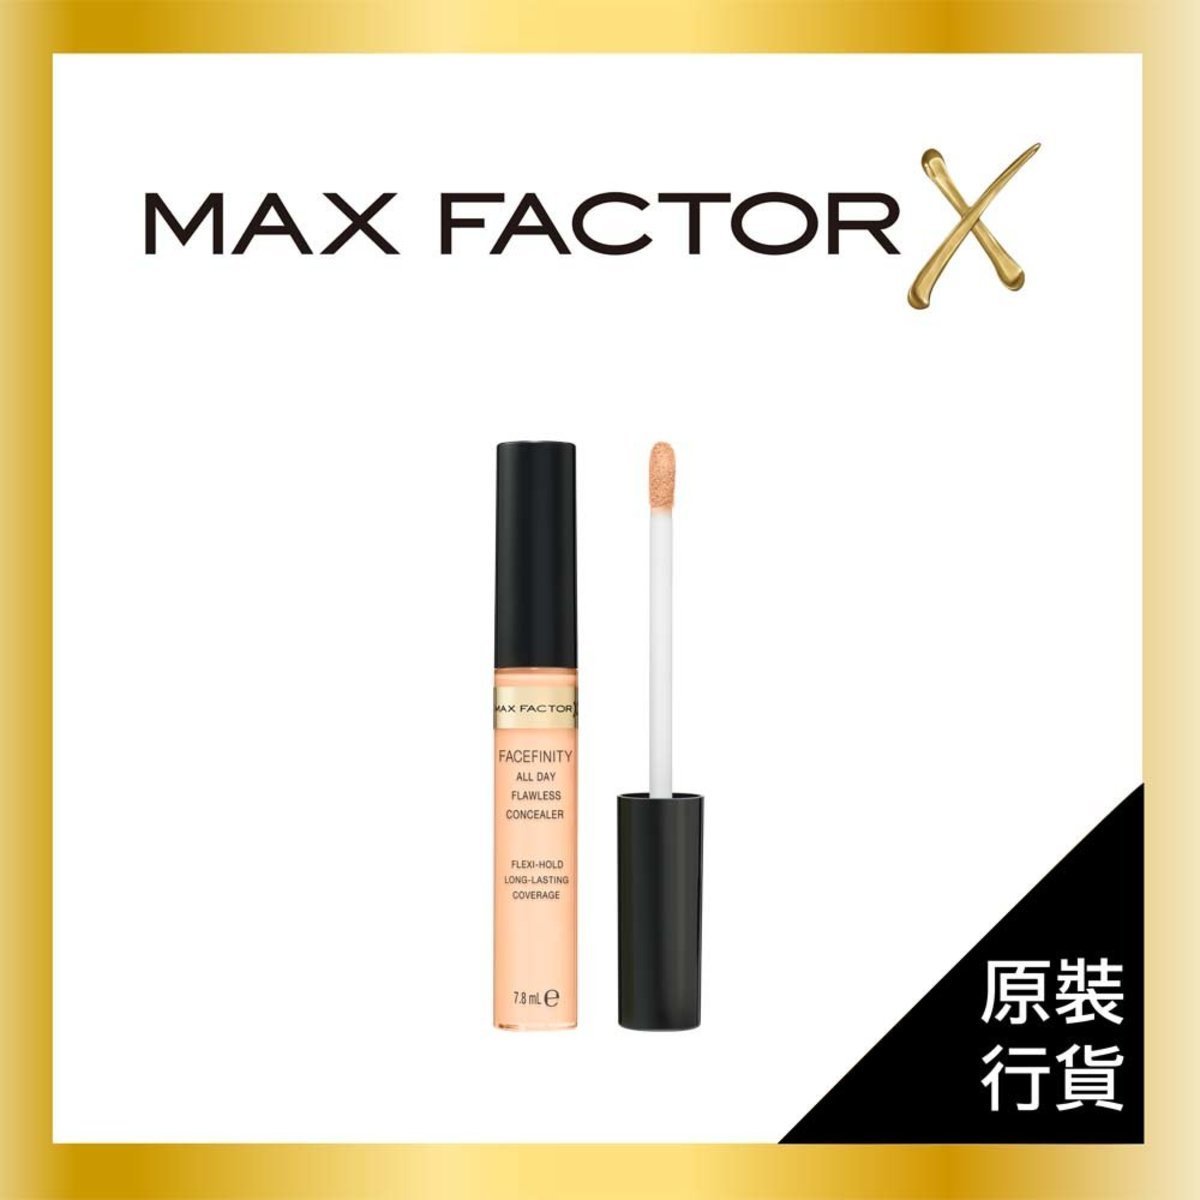 Factor Shopping Color All Concealer Flawless Facefinity | | Largest The HK HKTVmall Platform 010 Day Max | : 10